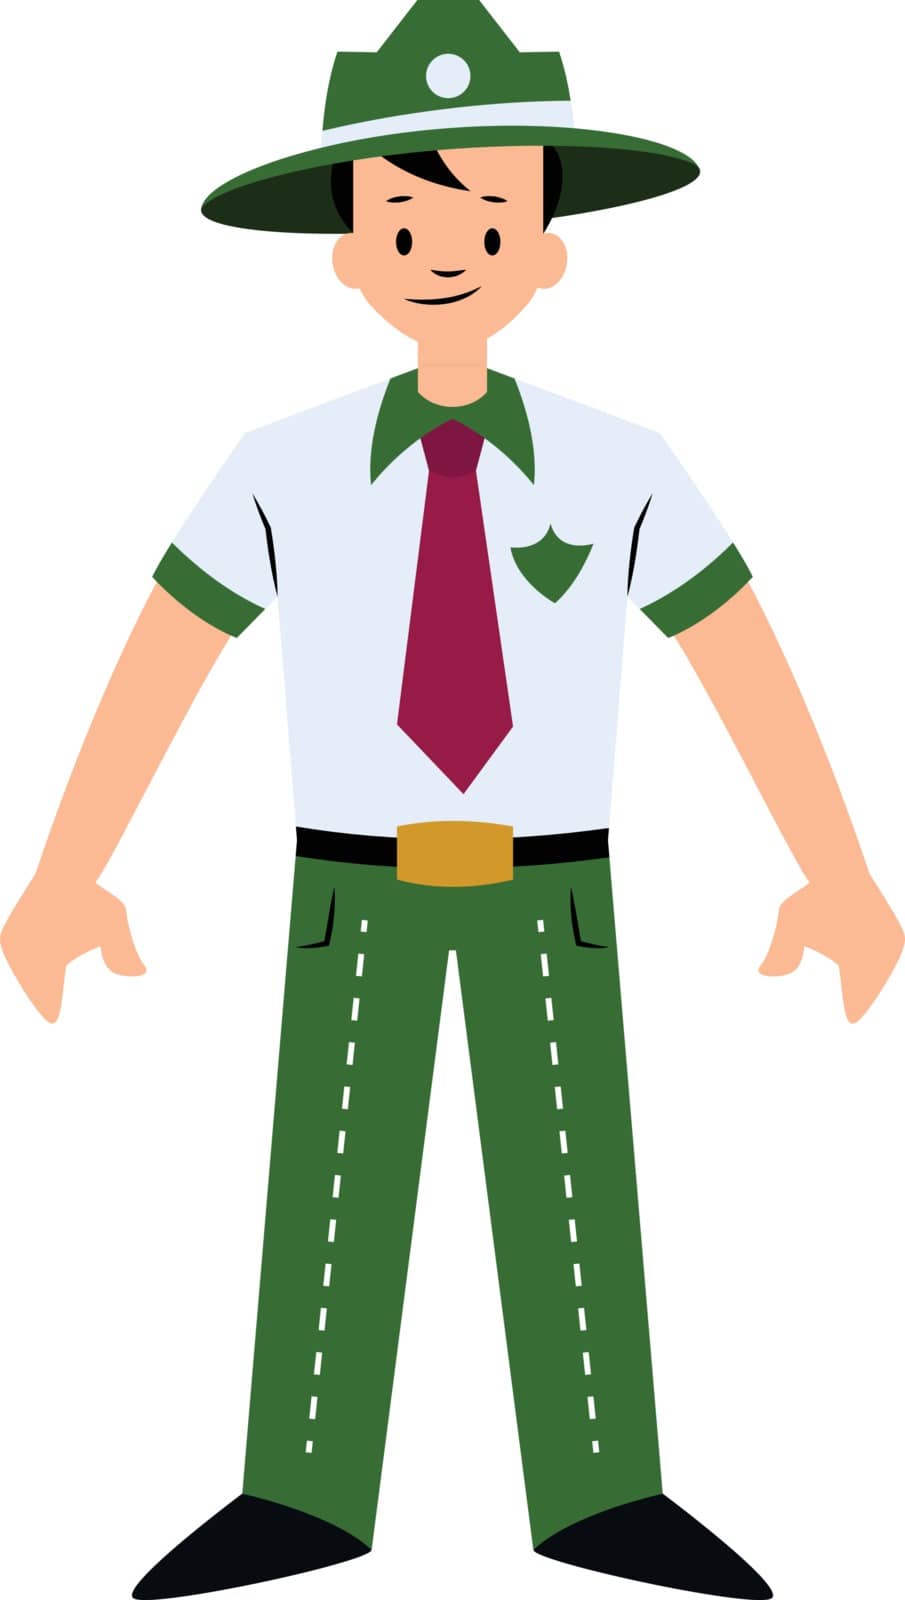 Forest guard character vector illustration on a white background by Morphart